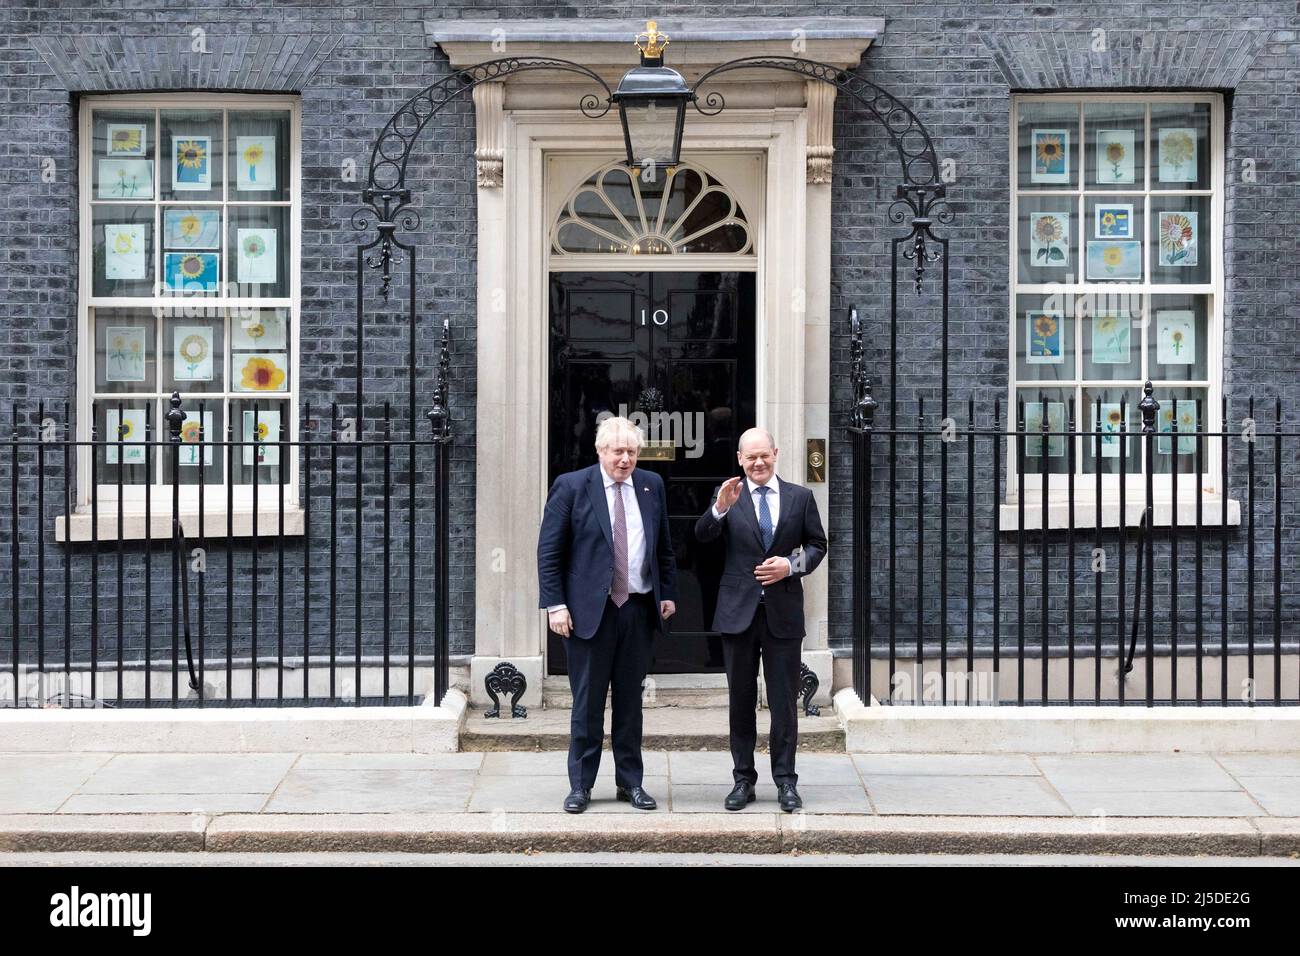 Chancellor of Germany Olaf Scholz arrives Downing Street and is received by UK Prime Minister Boris Johnson.   Images shot on the 8th April 2022.  © B Stock Photo